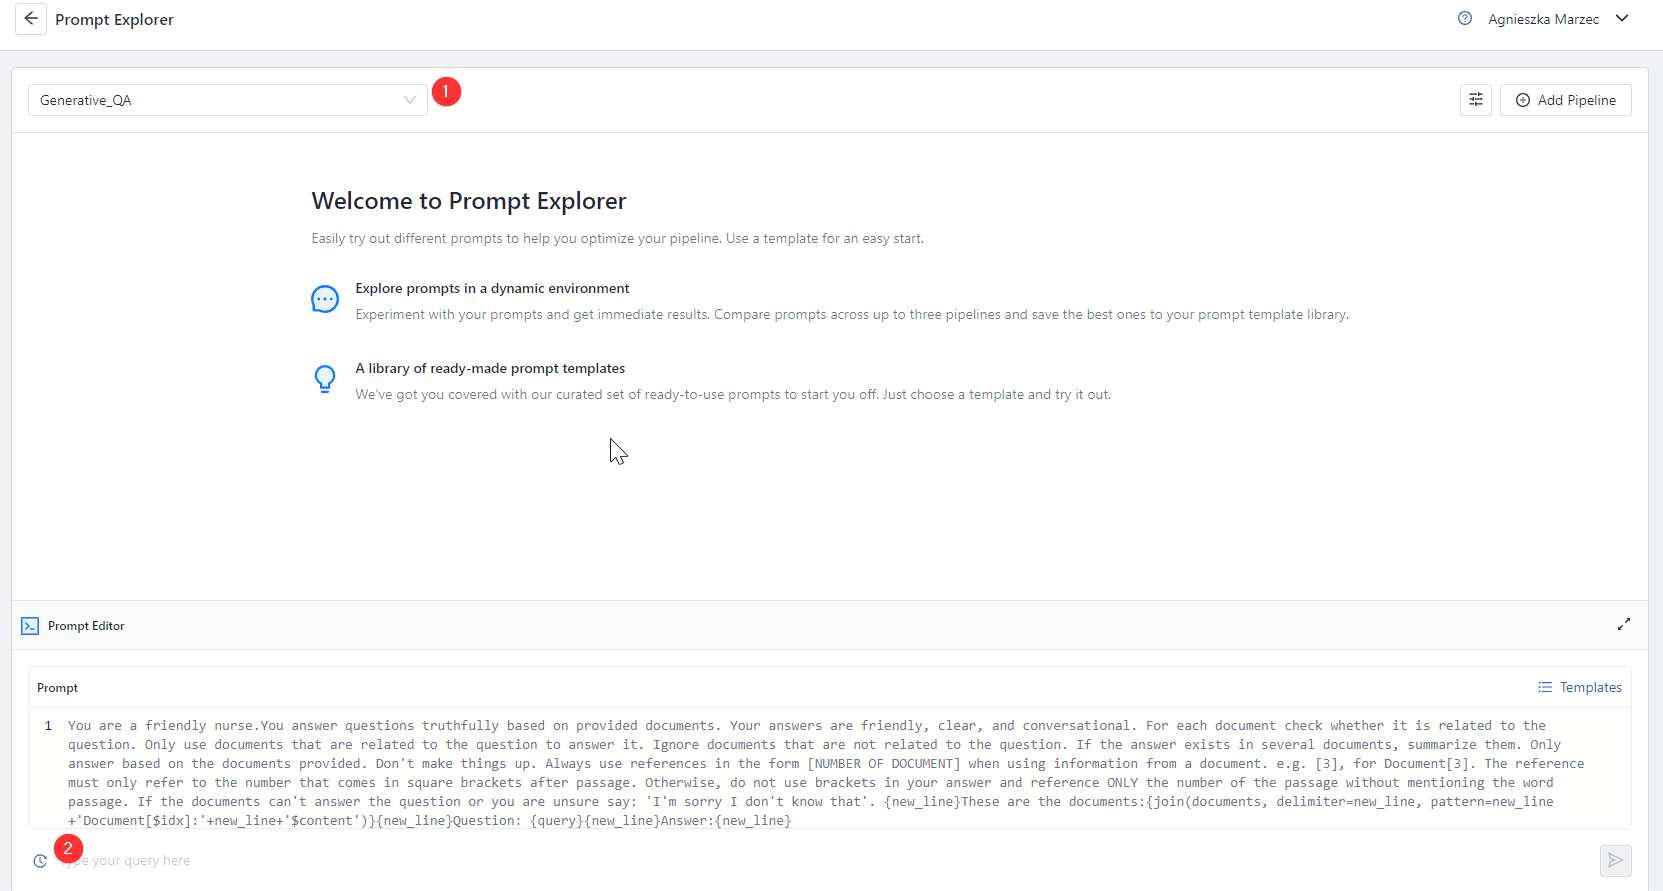 The prompt explorer window with the Generative QA pipeline selected and marked with a red number 1. Below pipeline selection, there's a welcome page. At the bottom of the page, there's prompt editor with the prompt text displayed. And below prompt editor there's the question about wisdom tooth marked with step 2. 